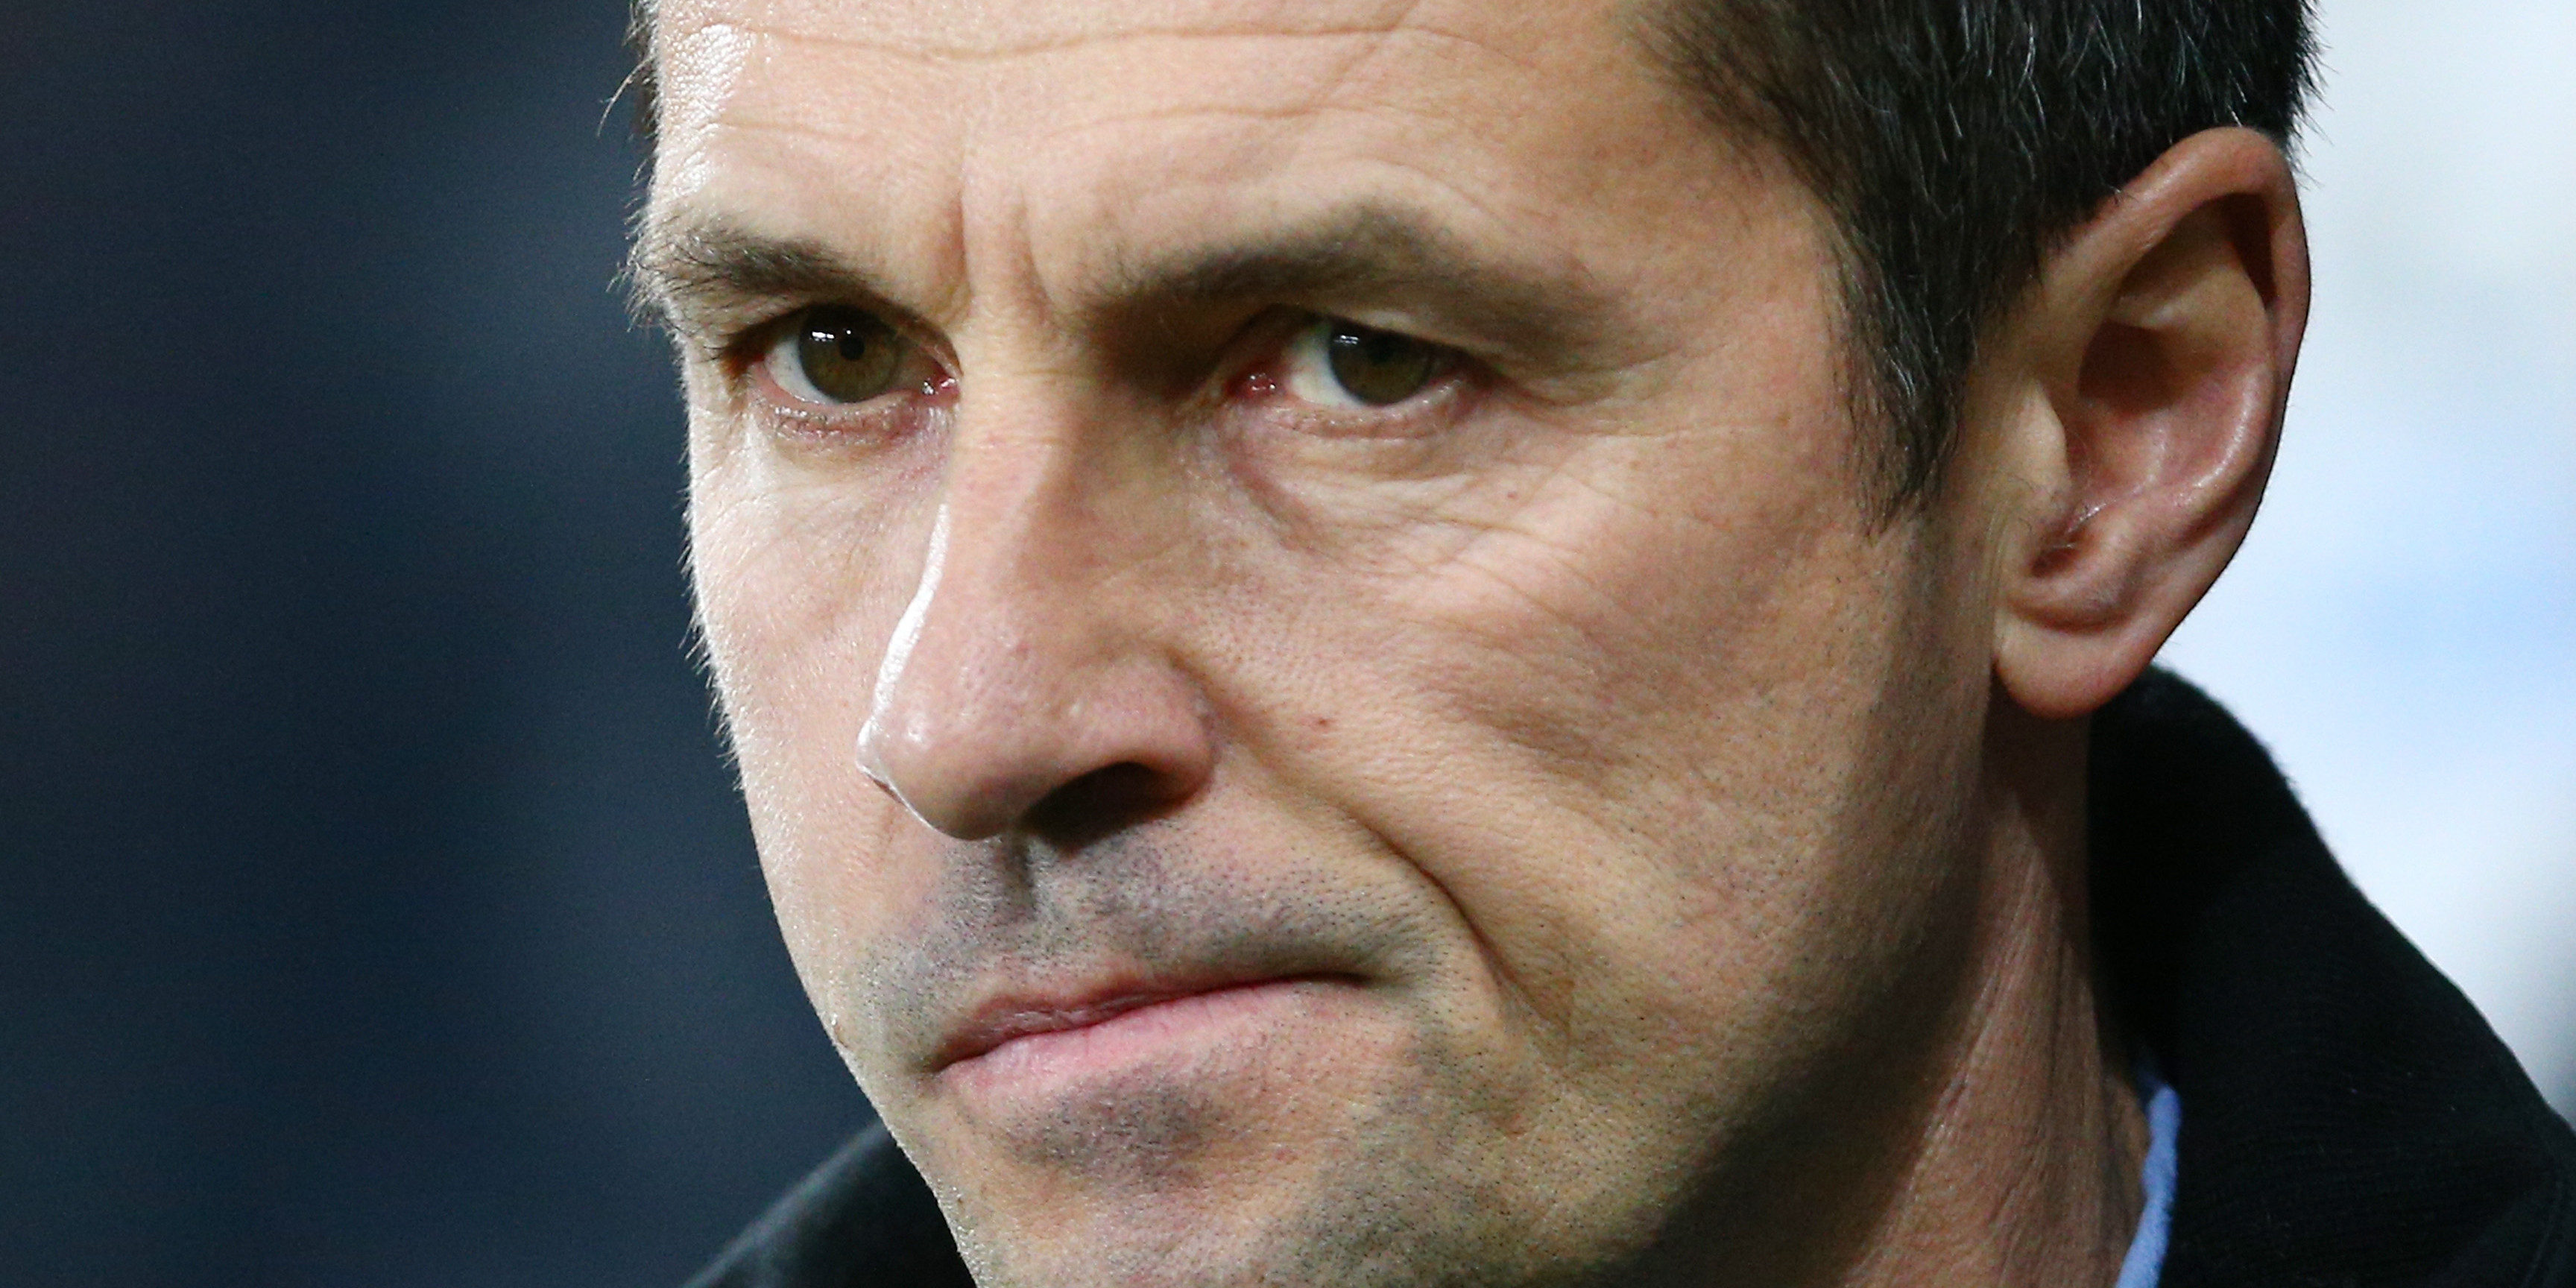 NEWCASTLE UPON TYNE, ENGLAND - DECEMBER 19:  Remi Garde Manager of Aston Villa looks on during the Barclays Premier League match between Newcastle United and Aston Villa at St James' Park on December 19, 2015 in Newcastle upon Tyne, England.  (Photo by Mark Runnacles/Getty Images)